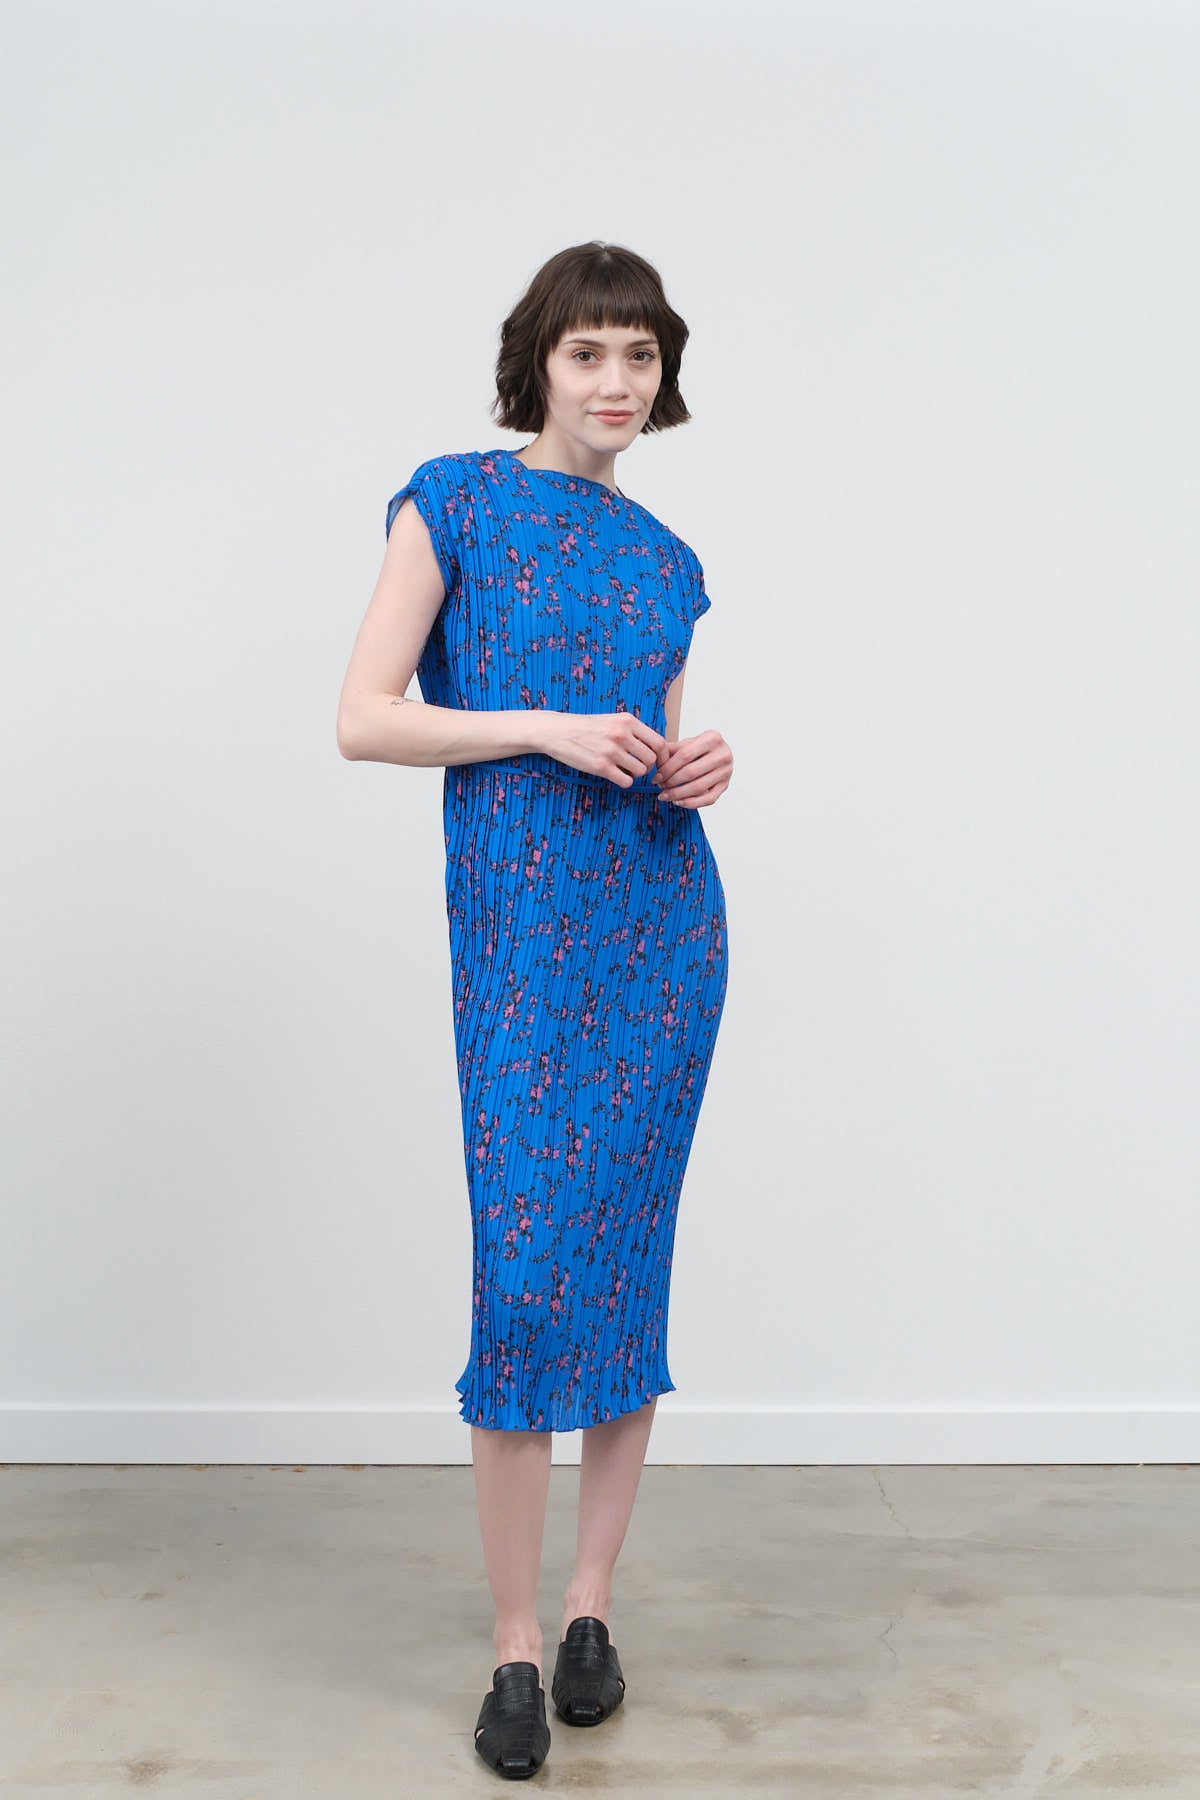 Styled view of Lucien Dress in Royal Trellis